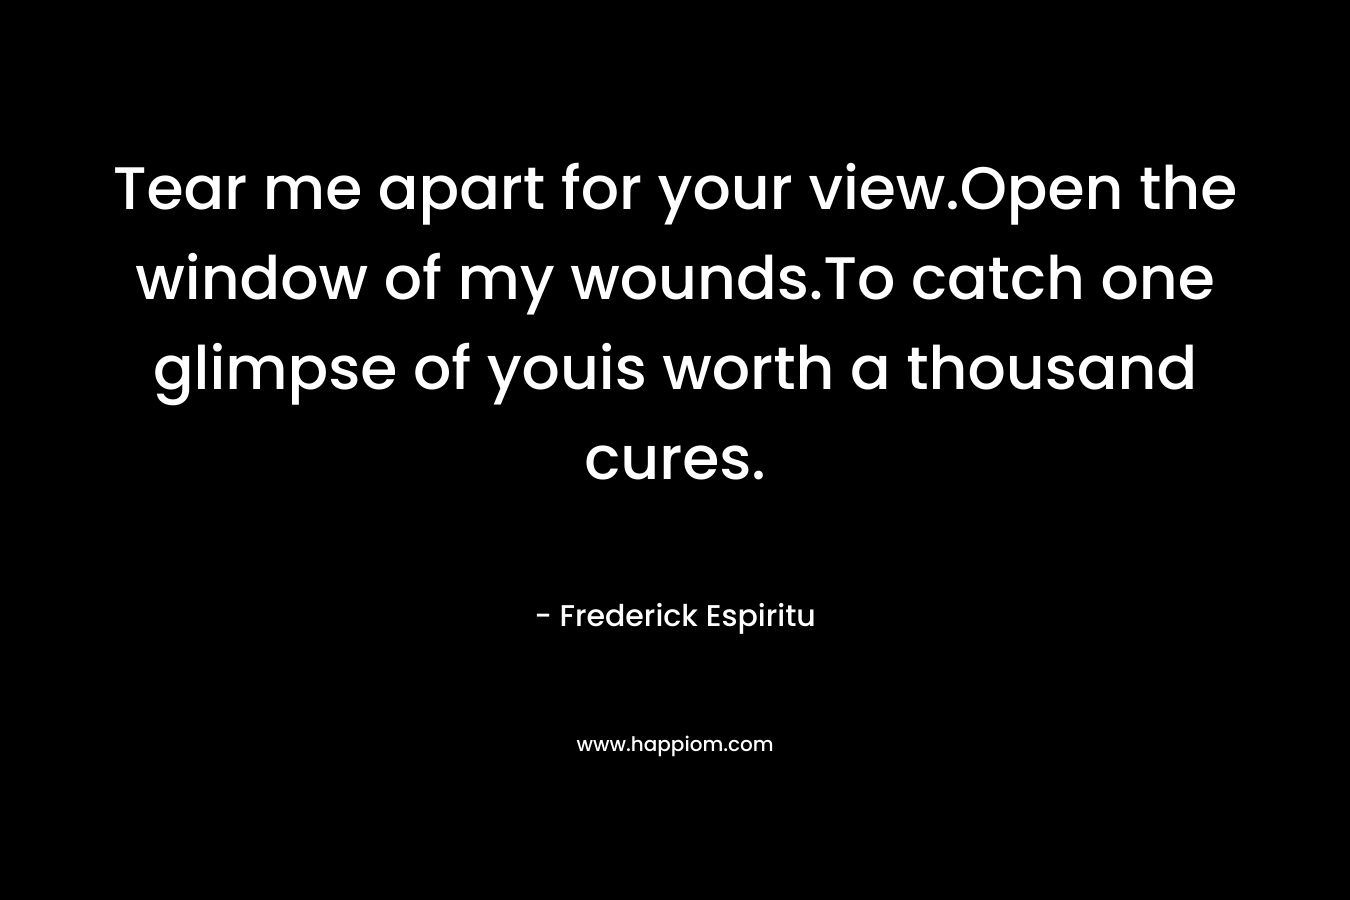 Tear me apart for your view.Open the window of my wounds.To catch one glimpse of youis worth a thousand cures.